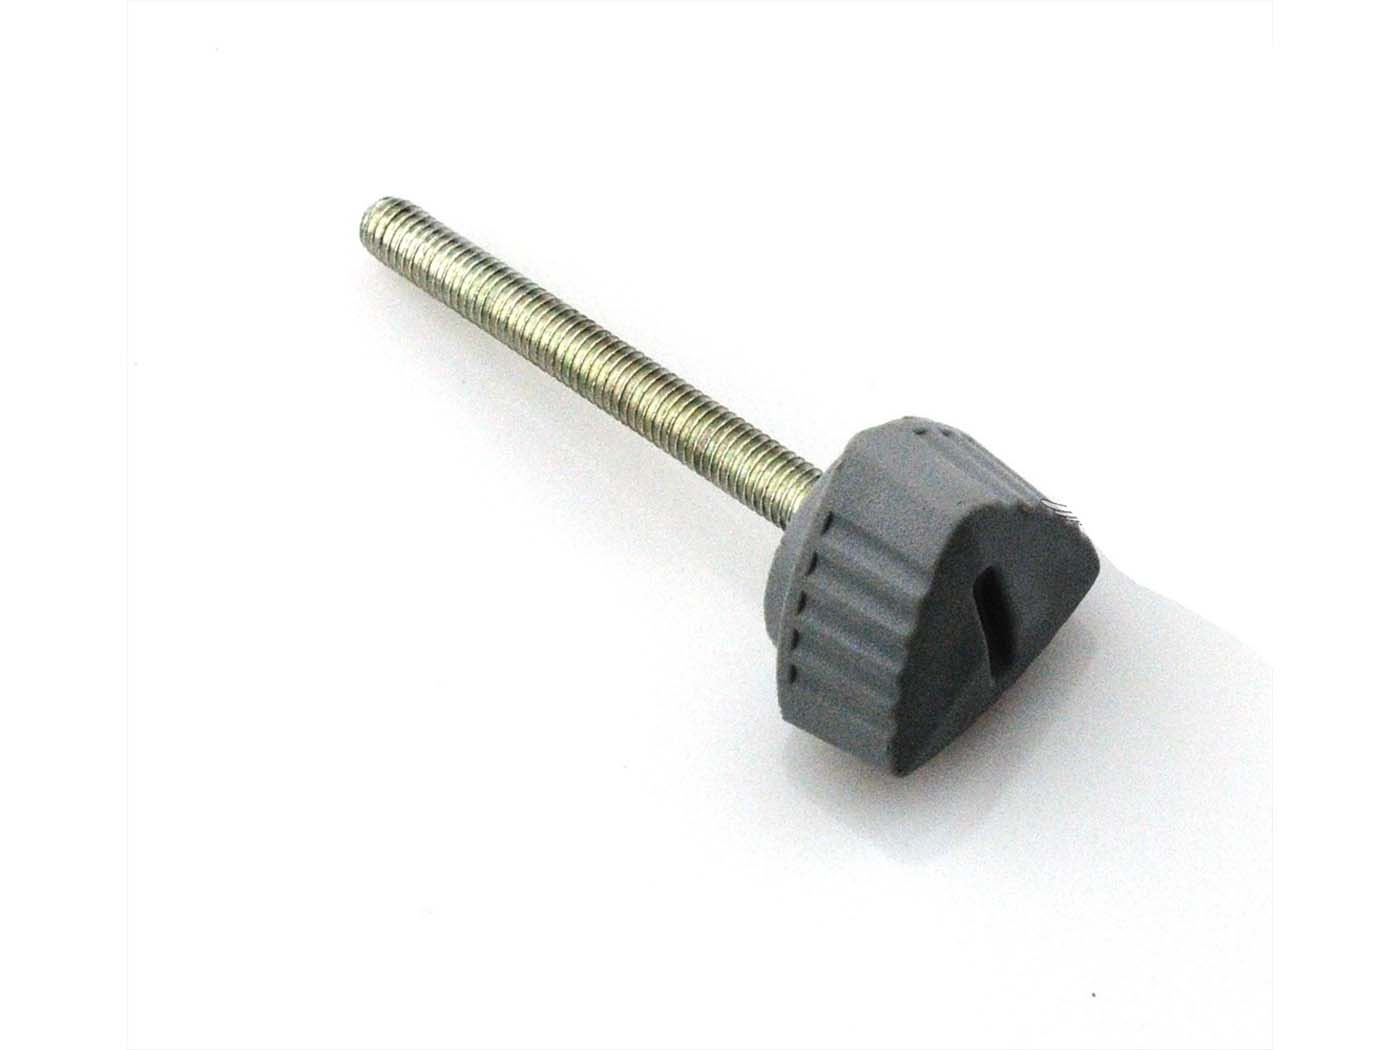 Fairing Screw Puch 36mm For Maxi Moped, Moped, Mokick